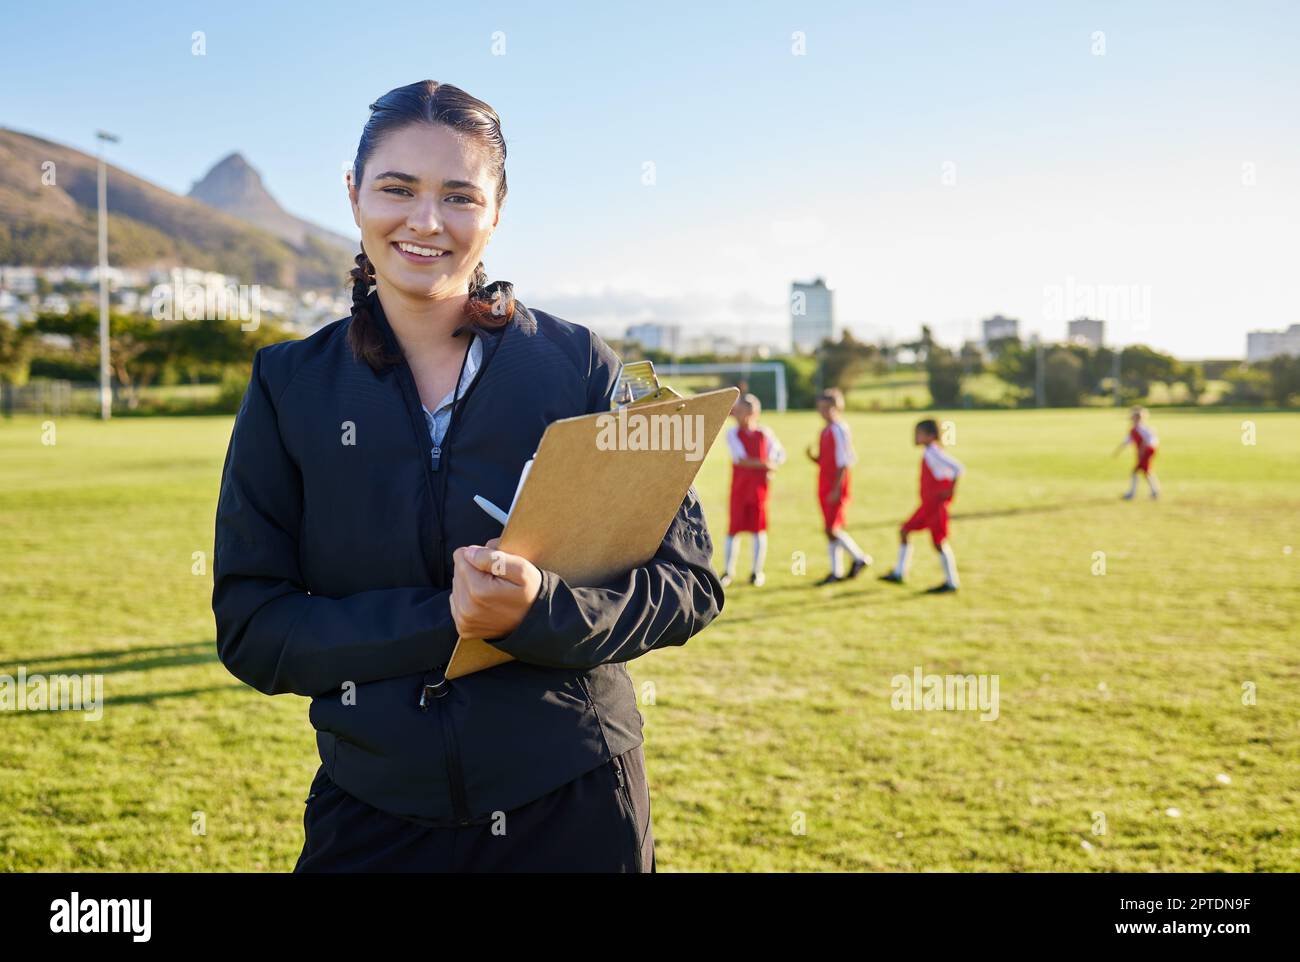 Football coach, junior sports and woman with clipboard coaching children on a soccer field or pitch outside on a sunny day. Happy female pe trainer ou Stock Photo